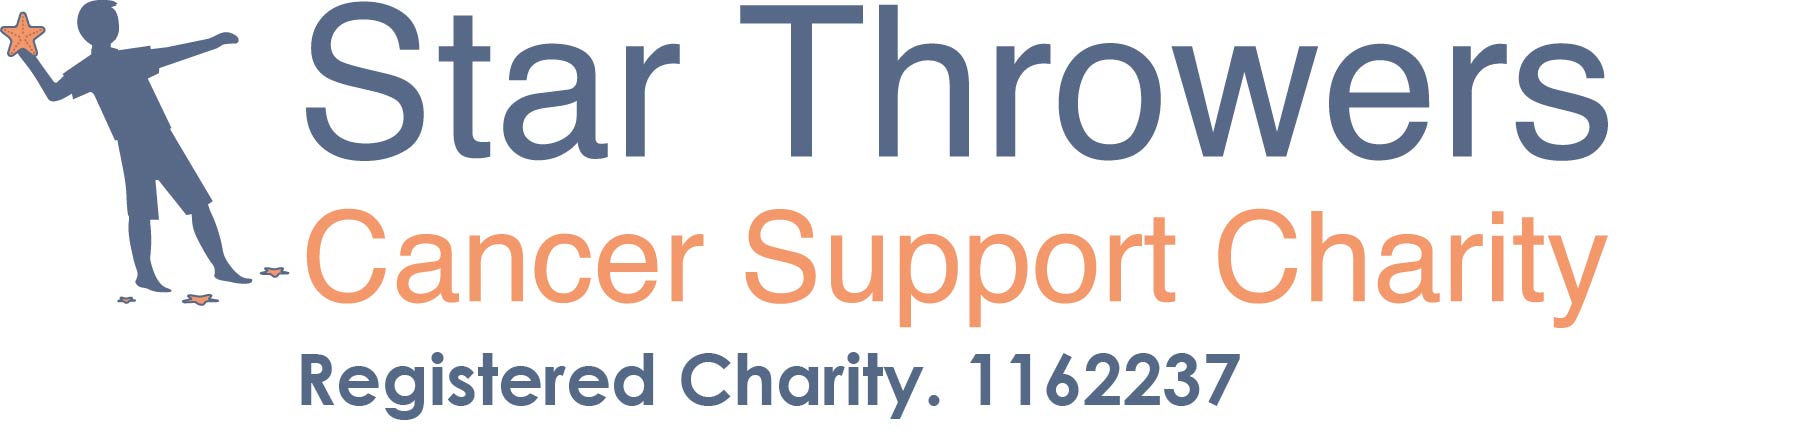 logo for Star Throwers - Cancer Support Charity